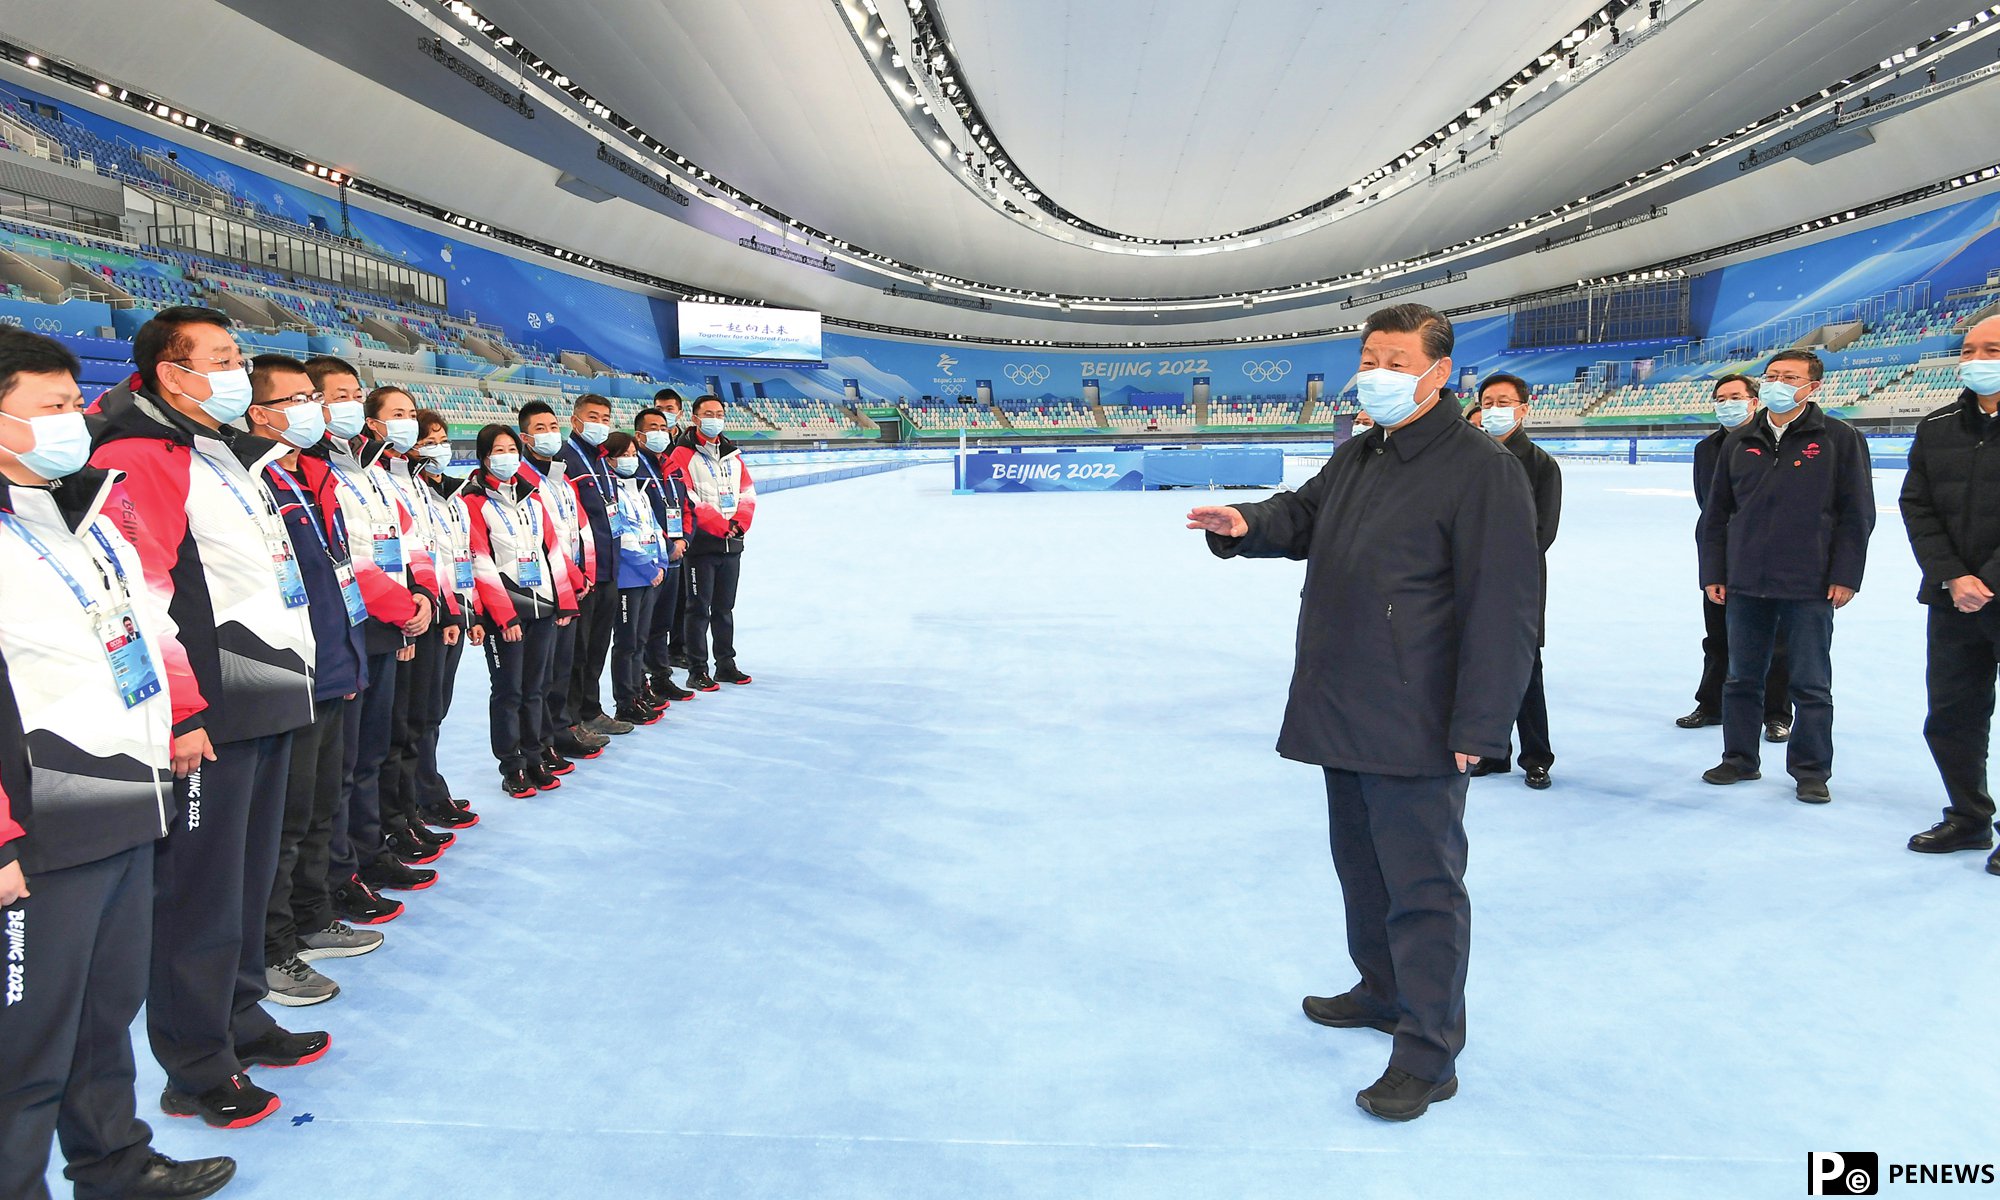 At 10-day countdown of the Winter Olympics, Beijing has gained wide intl support and made full preparations of venues; city all teed up for event